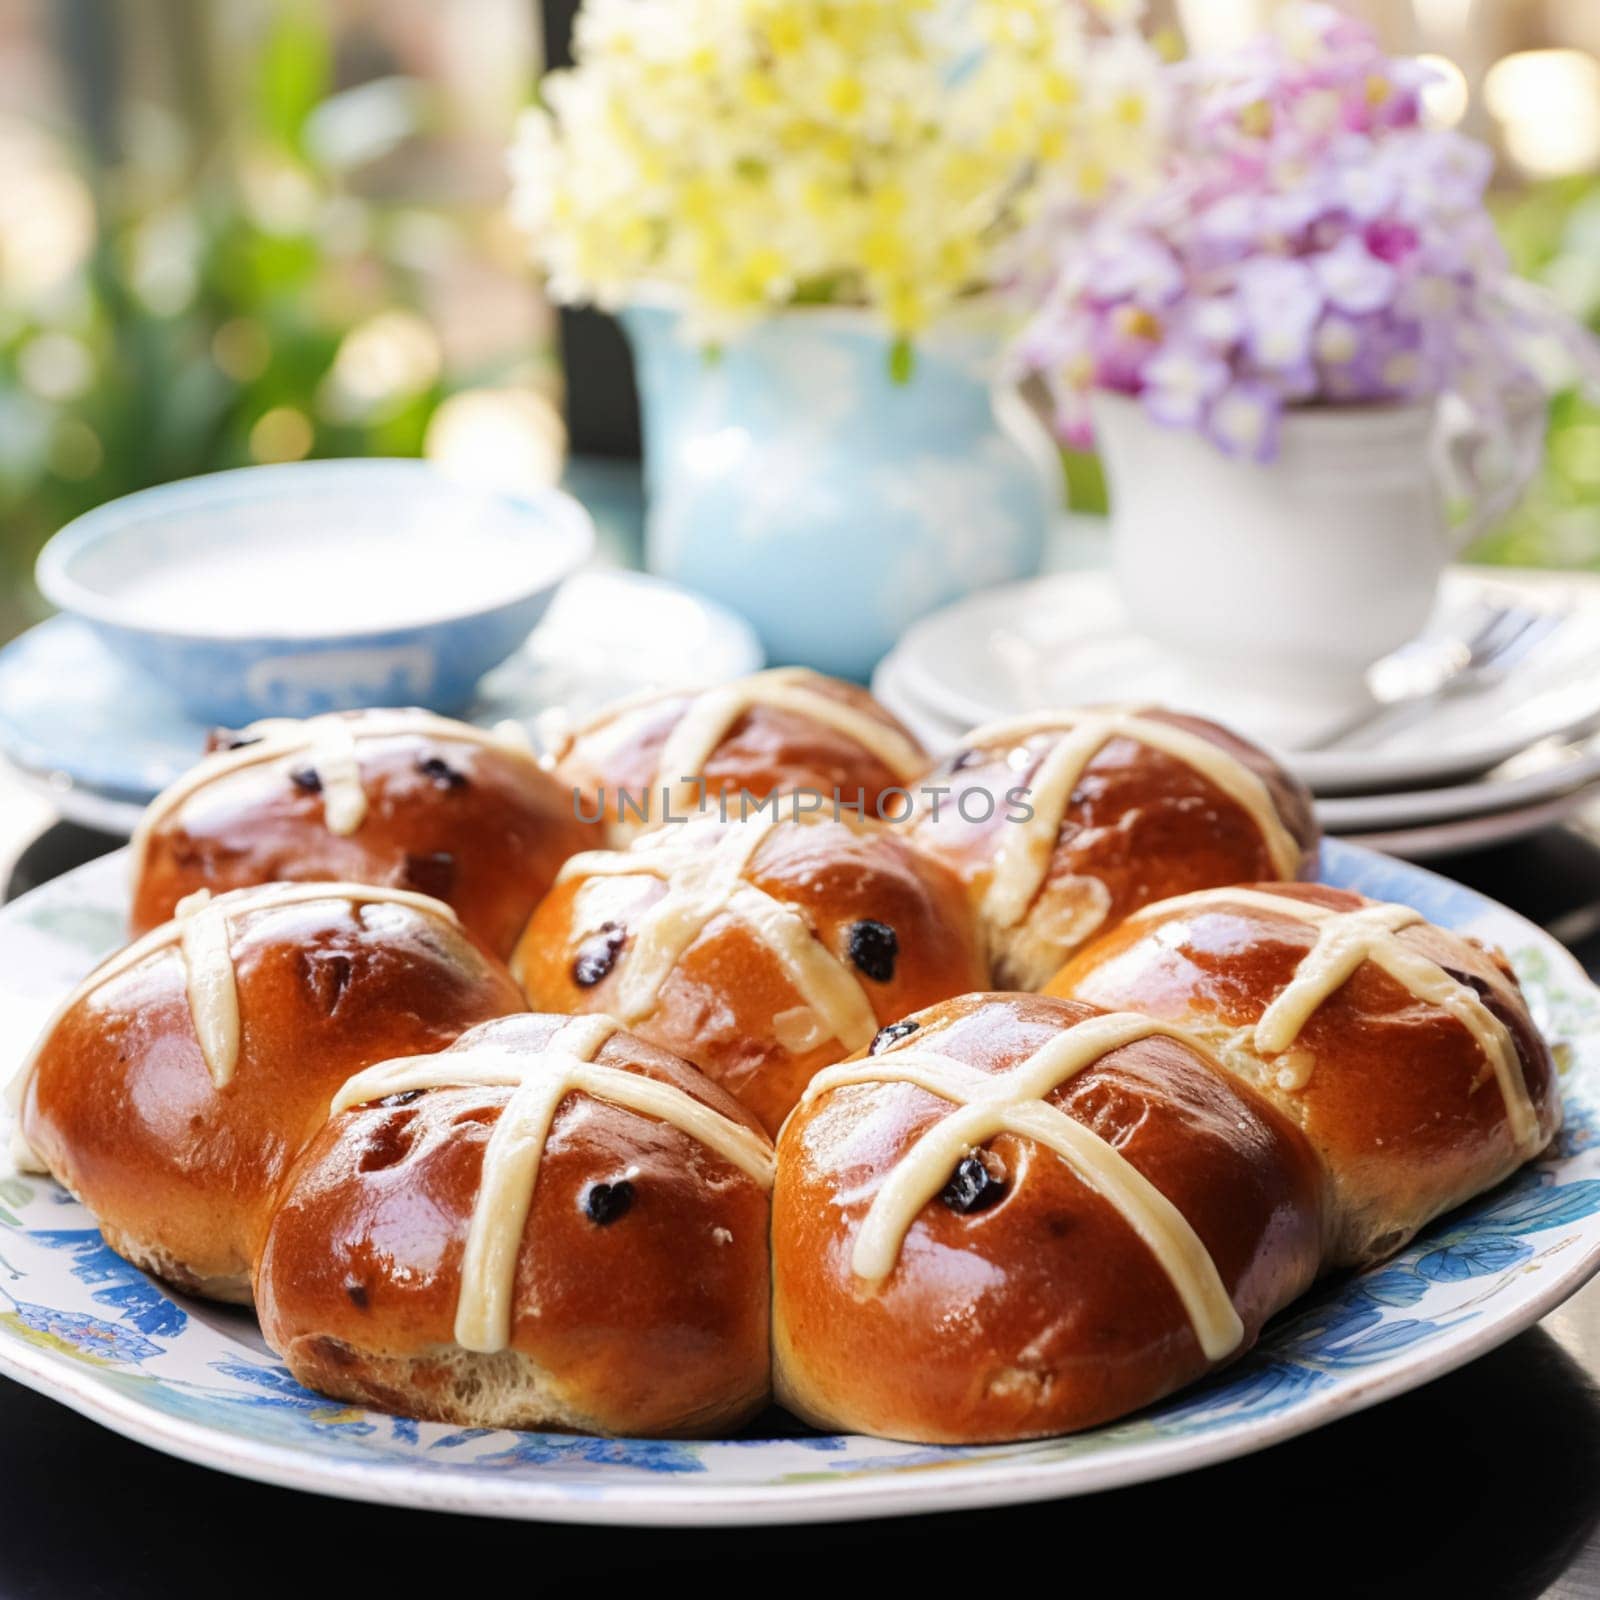 Hot cross buns in English country cottage, Good Friday, religious holiday and british cuisine recipe inspiration